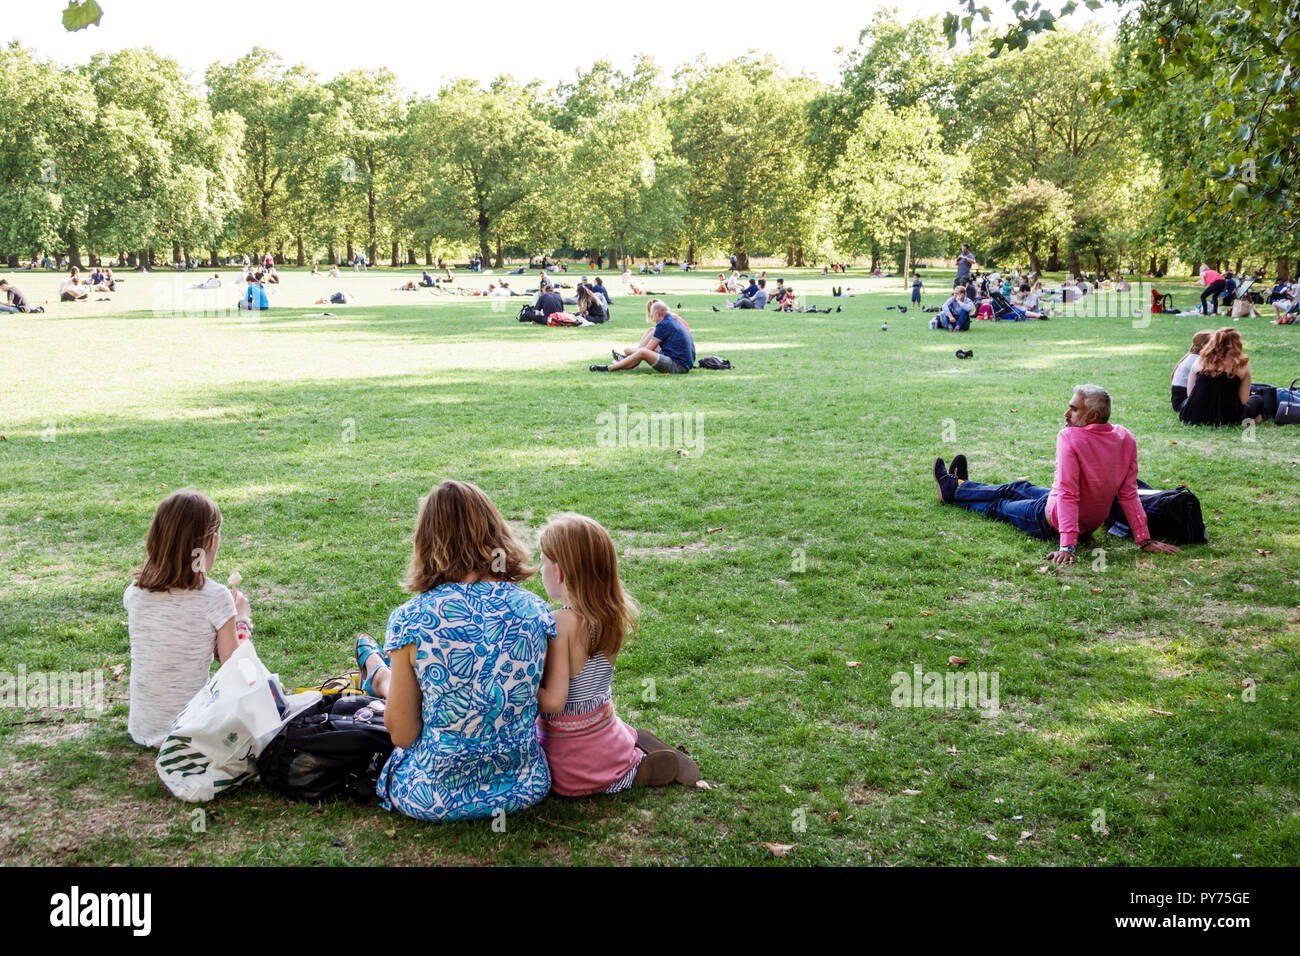 London England,UK,United Kingdom Great Britain,Green Park,Ritz Corner,Royal Parks,lawn,outdoors,green space,sitting seated on grass,adult adults woman Stock Photo